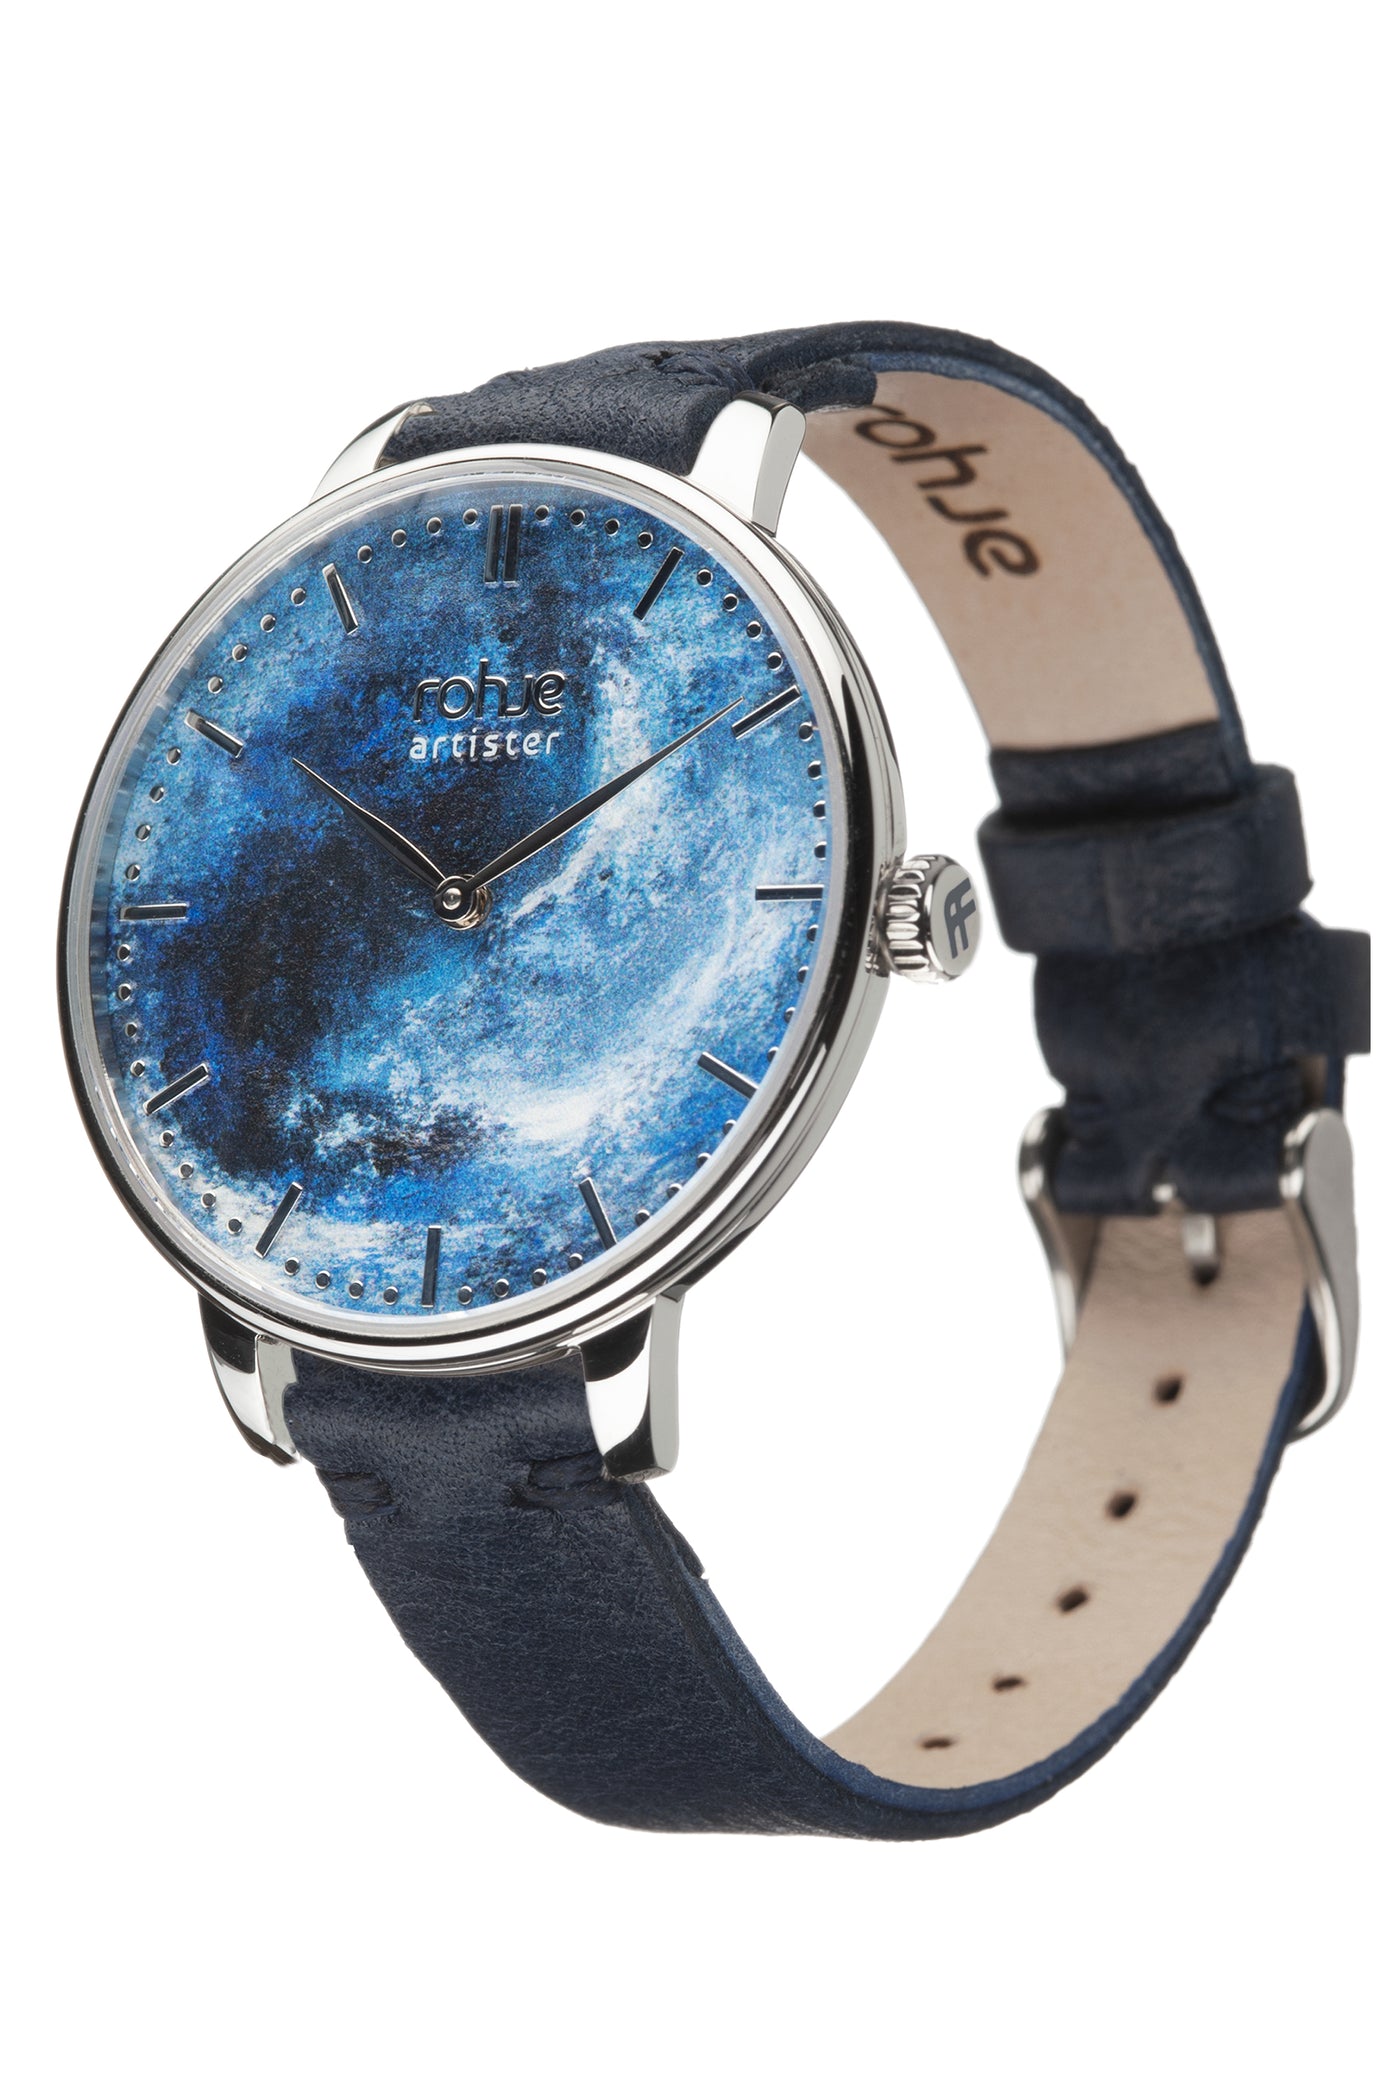 Rohje Artister blue with reindeer strap steel watch with deep blue dial front #strap_dark-blue-reindeer-leather